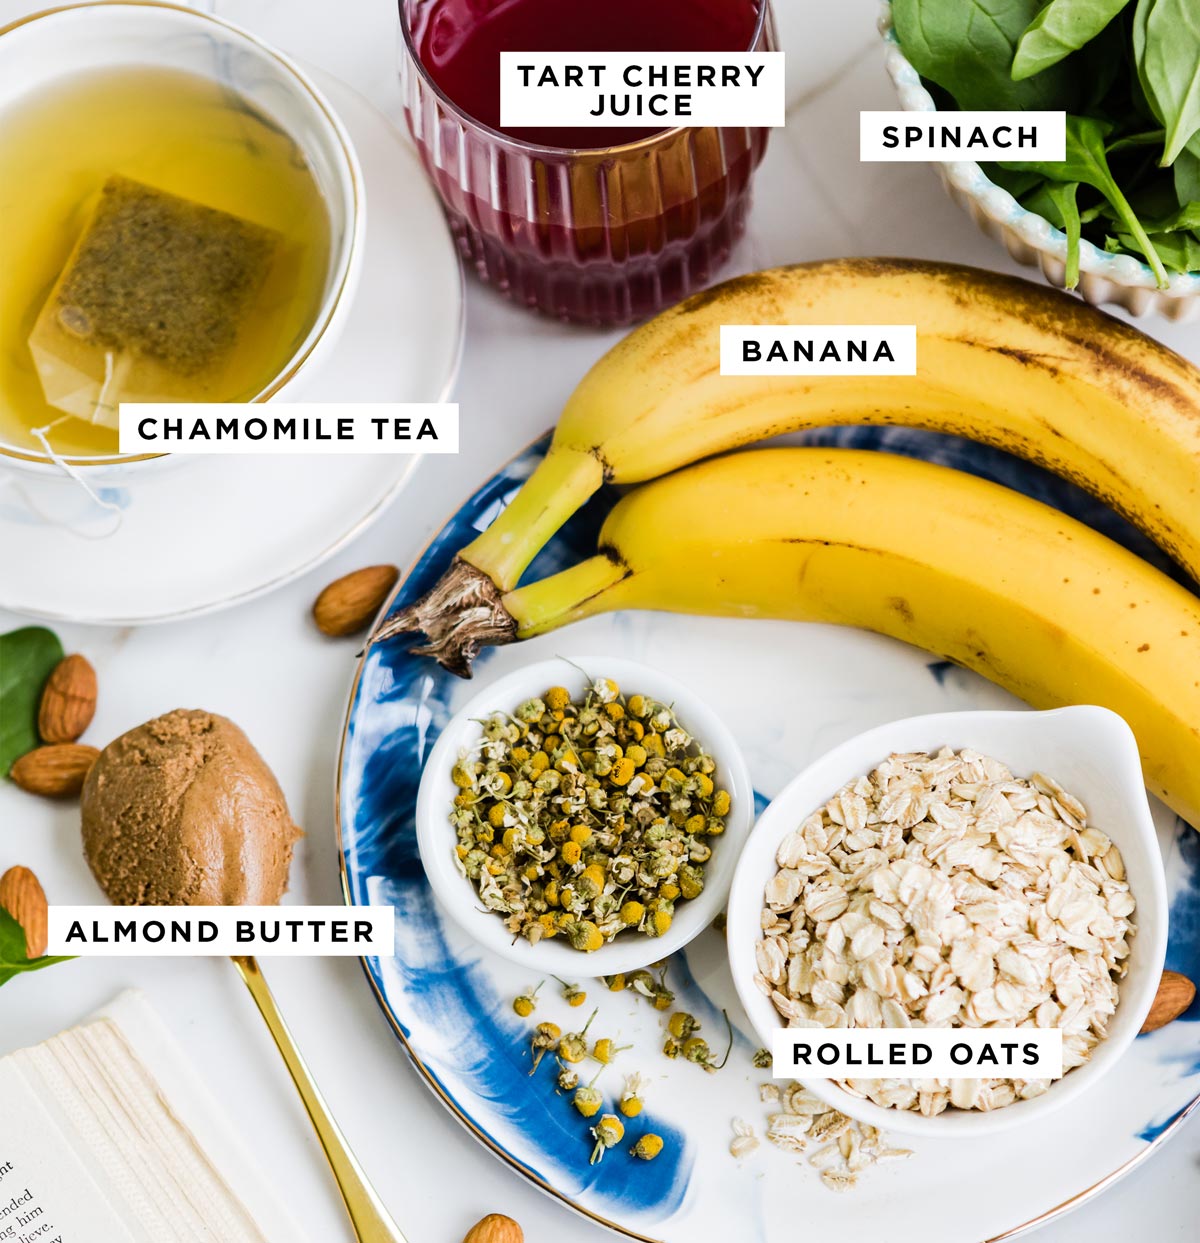 ingredients that promote good sleep including tart cherry juice, spinach, banana, chamomile tea, almond butter and rolled oats.